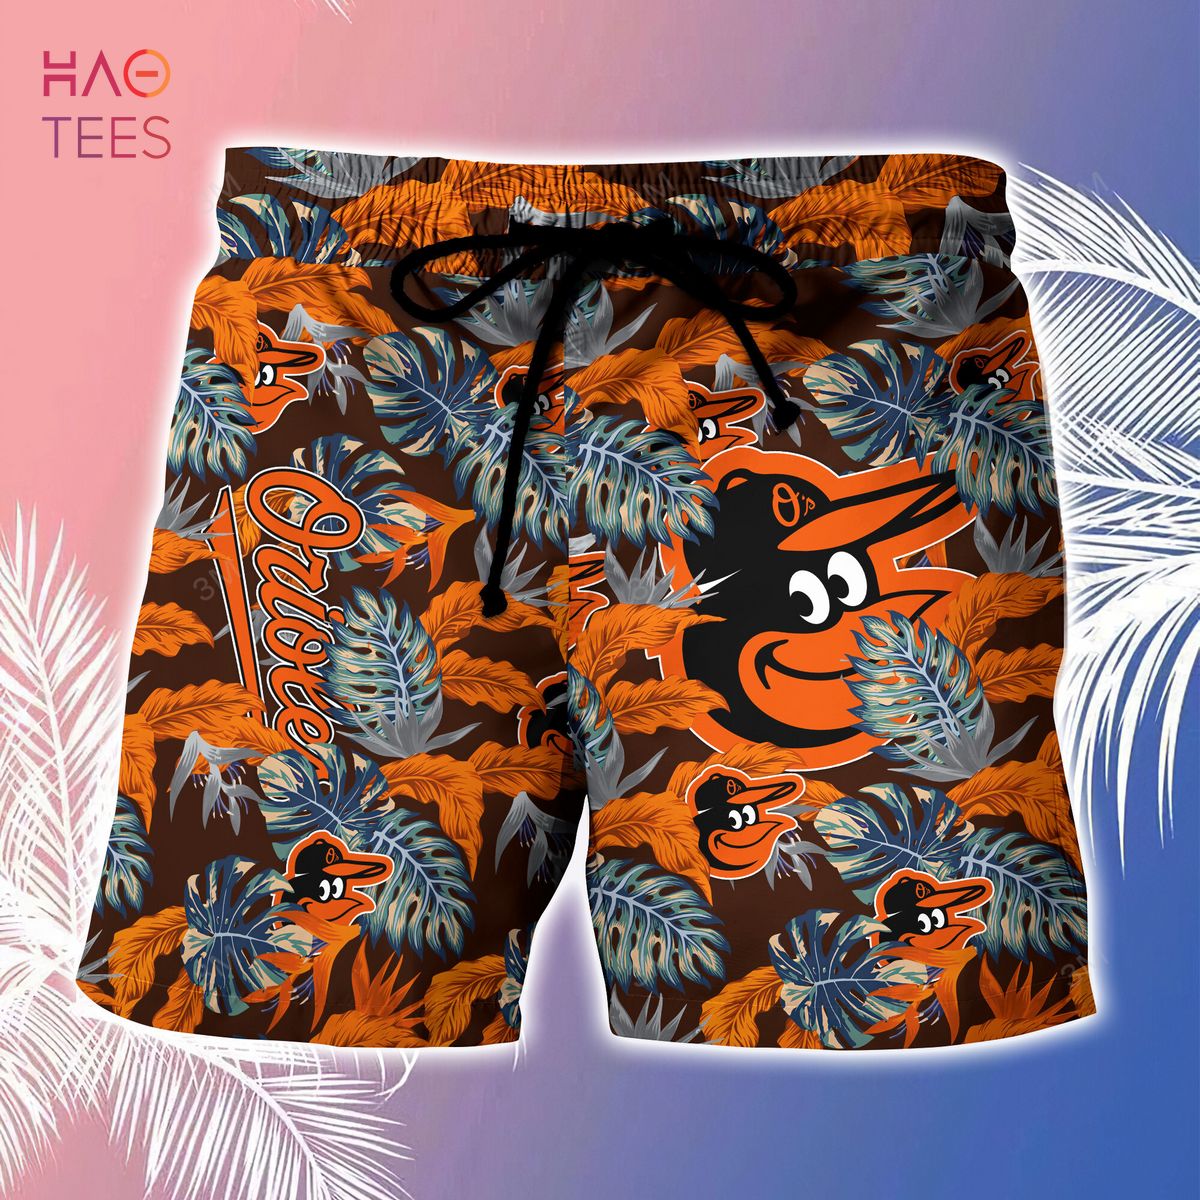 Orioles Hawaiian Shirt Graphic Design Baltimore Orioles Gift - Personalized  Gifts: Family, Sports, Occasions, Trending